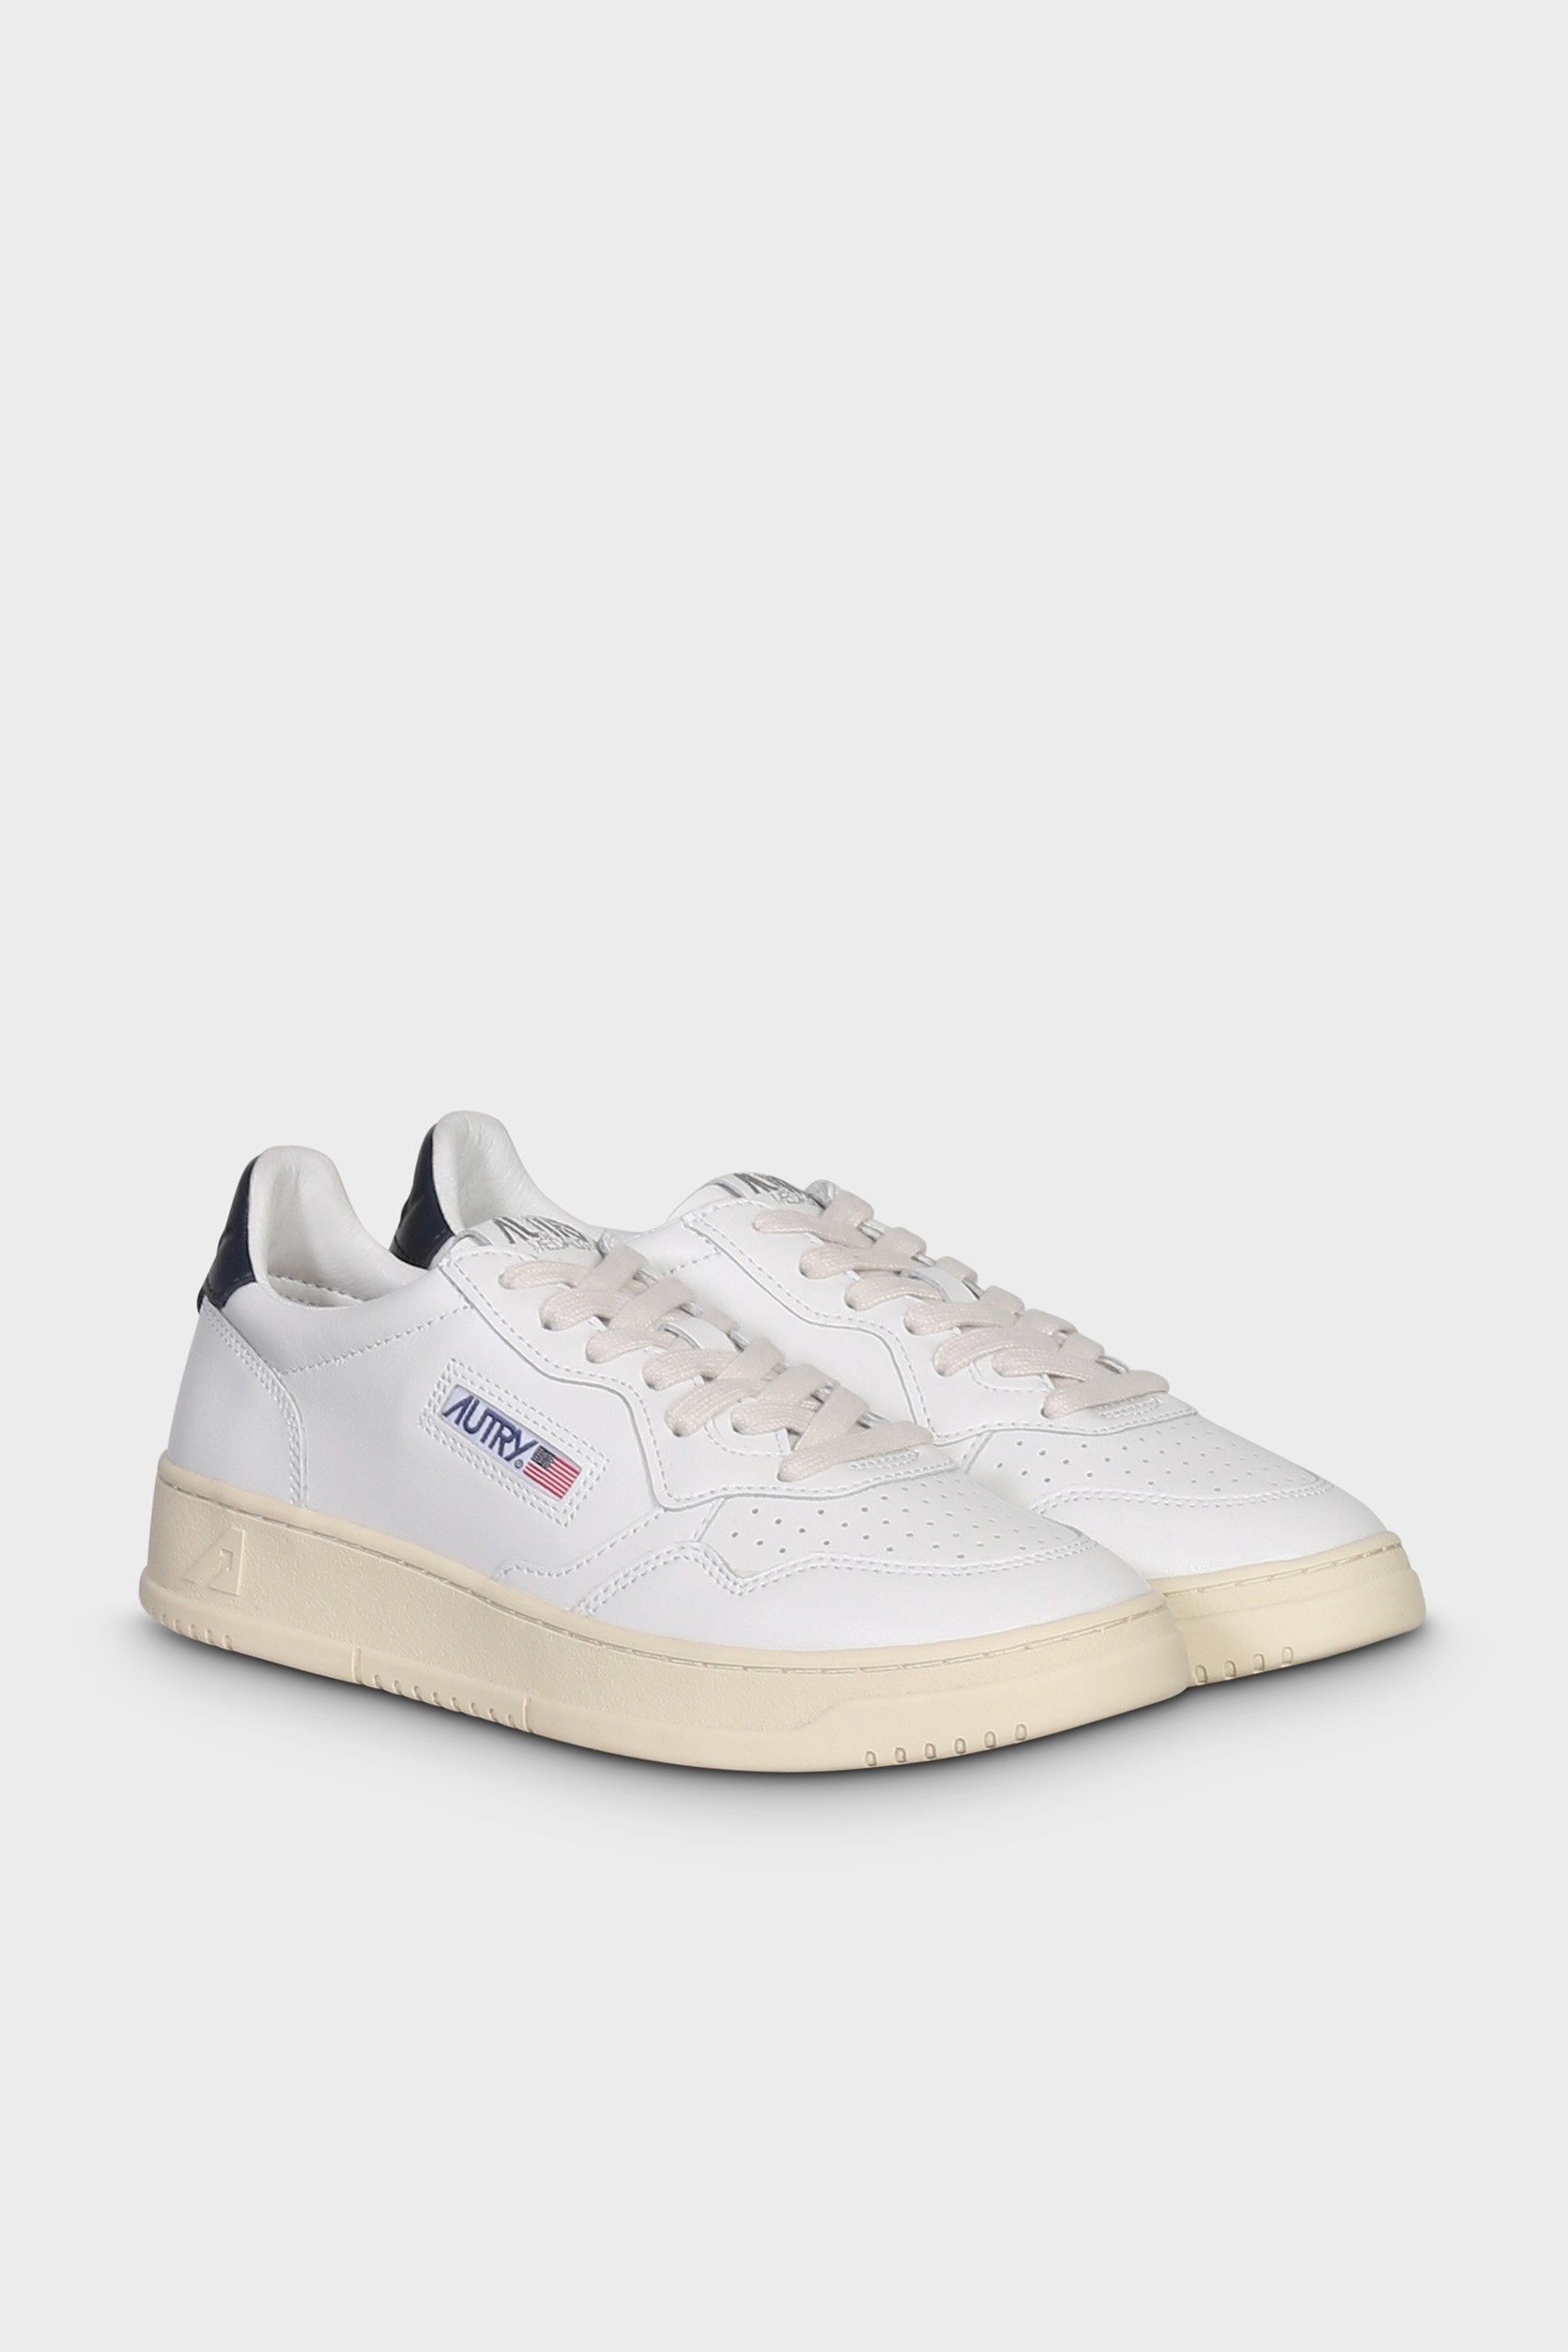 AUTRY ACTION SHOES Medalist Low Sneaker in White/Space 40